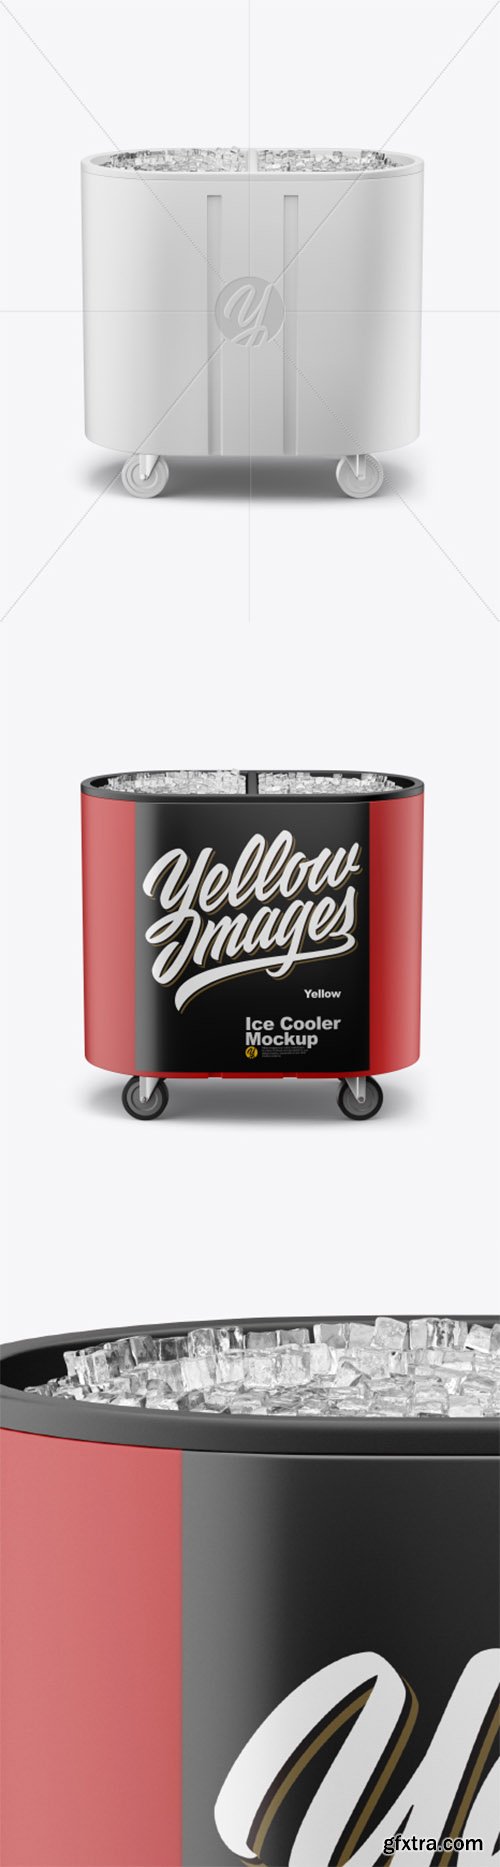 Outdoor Ice Cooler Mockup - Front View (High-Angle Shot) 29902